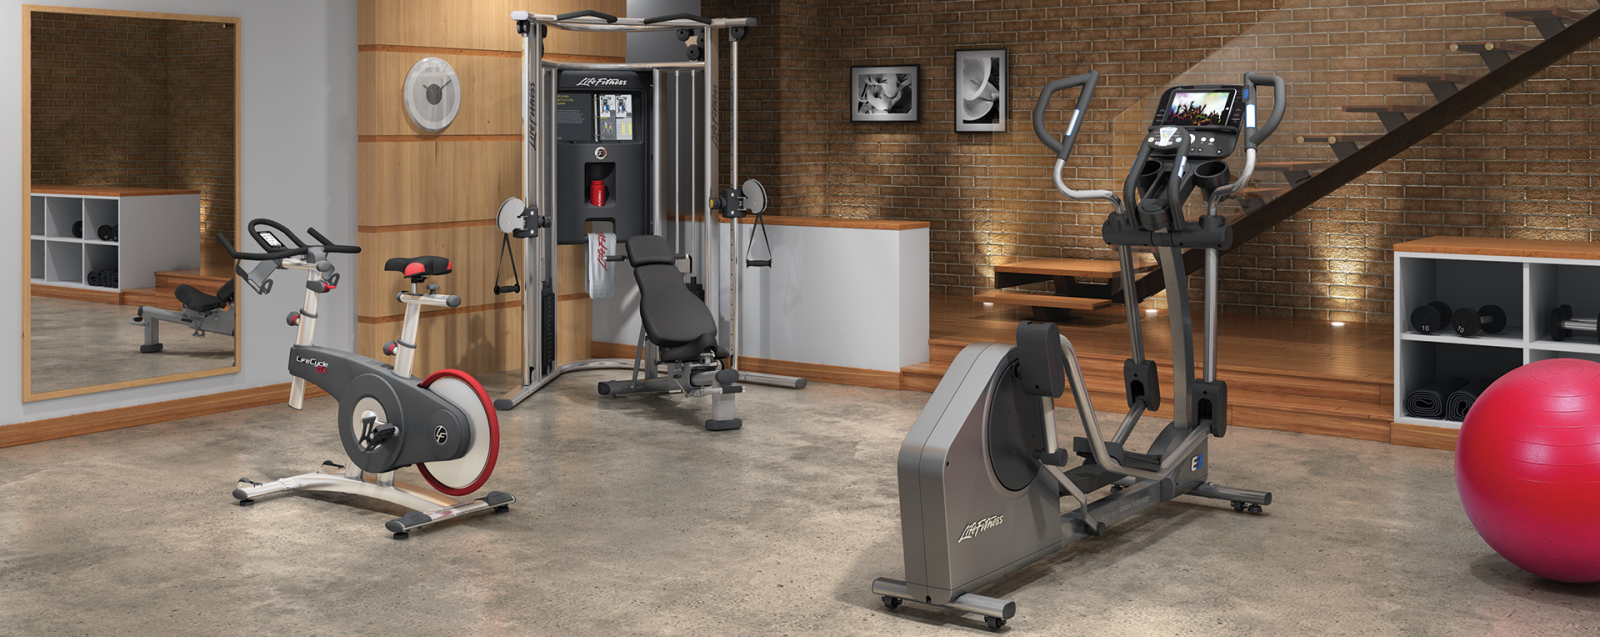 How To Save Money On Fitness Equipment